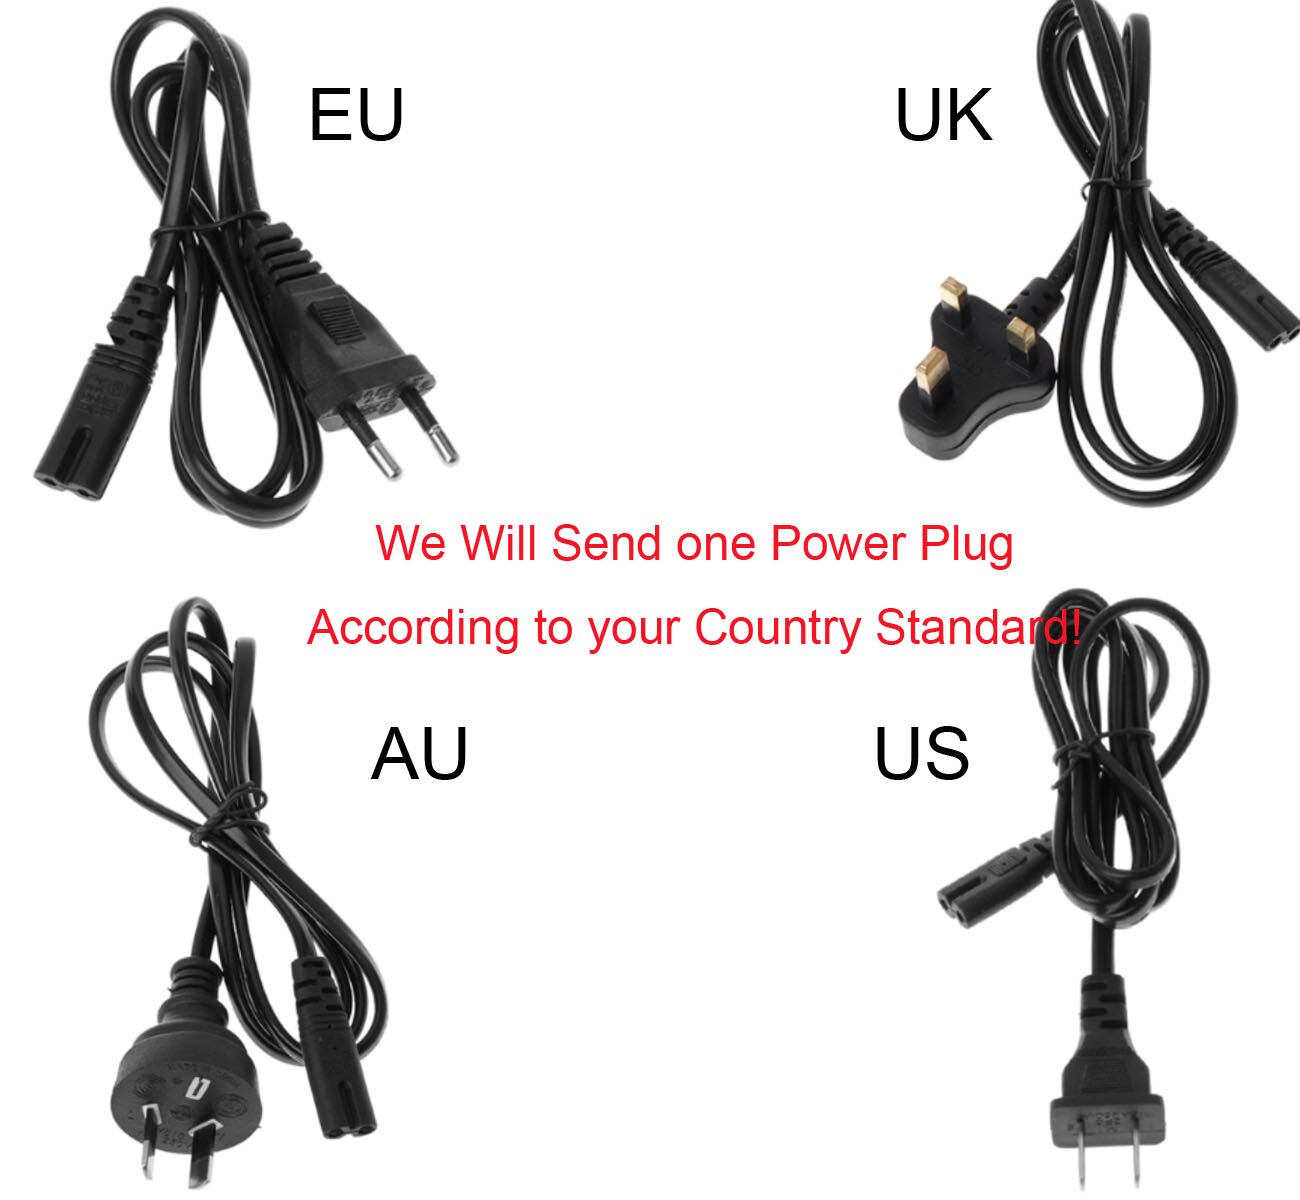 Ac Power Adapter Oplader Voor Sony ACL20, ACL20A, ACL25, ACL25A, ACL25B, ACL25C, ACL200, ACL200B, ACL200C, ACL200D